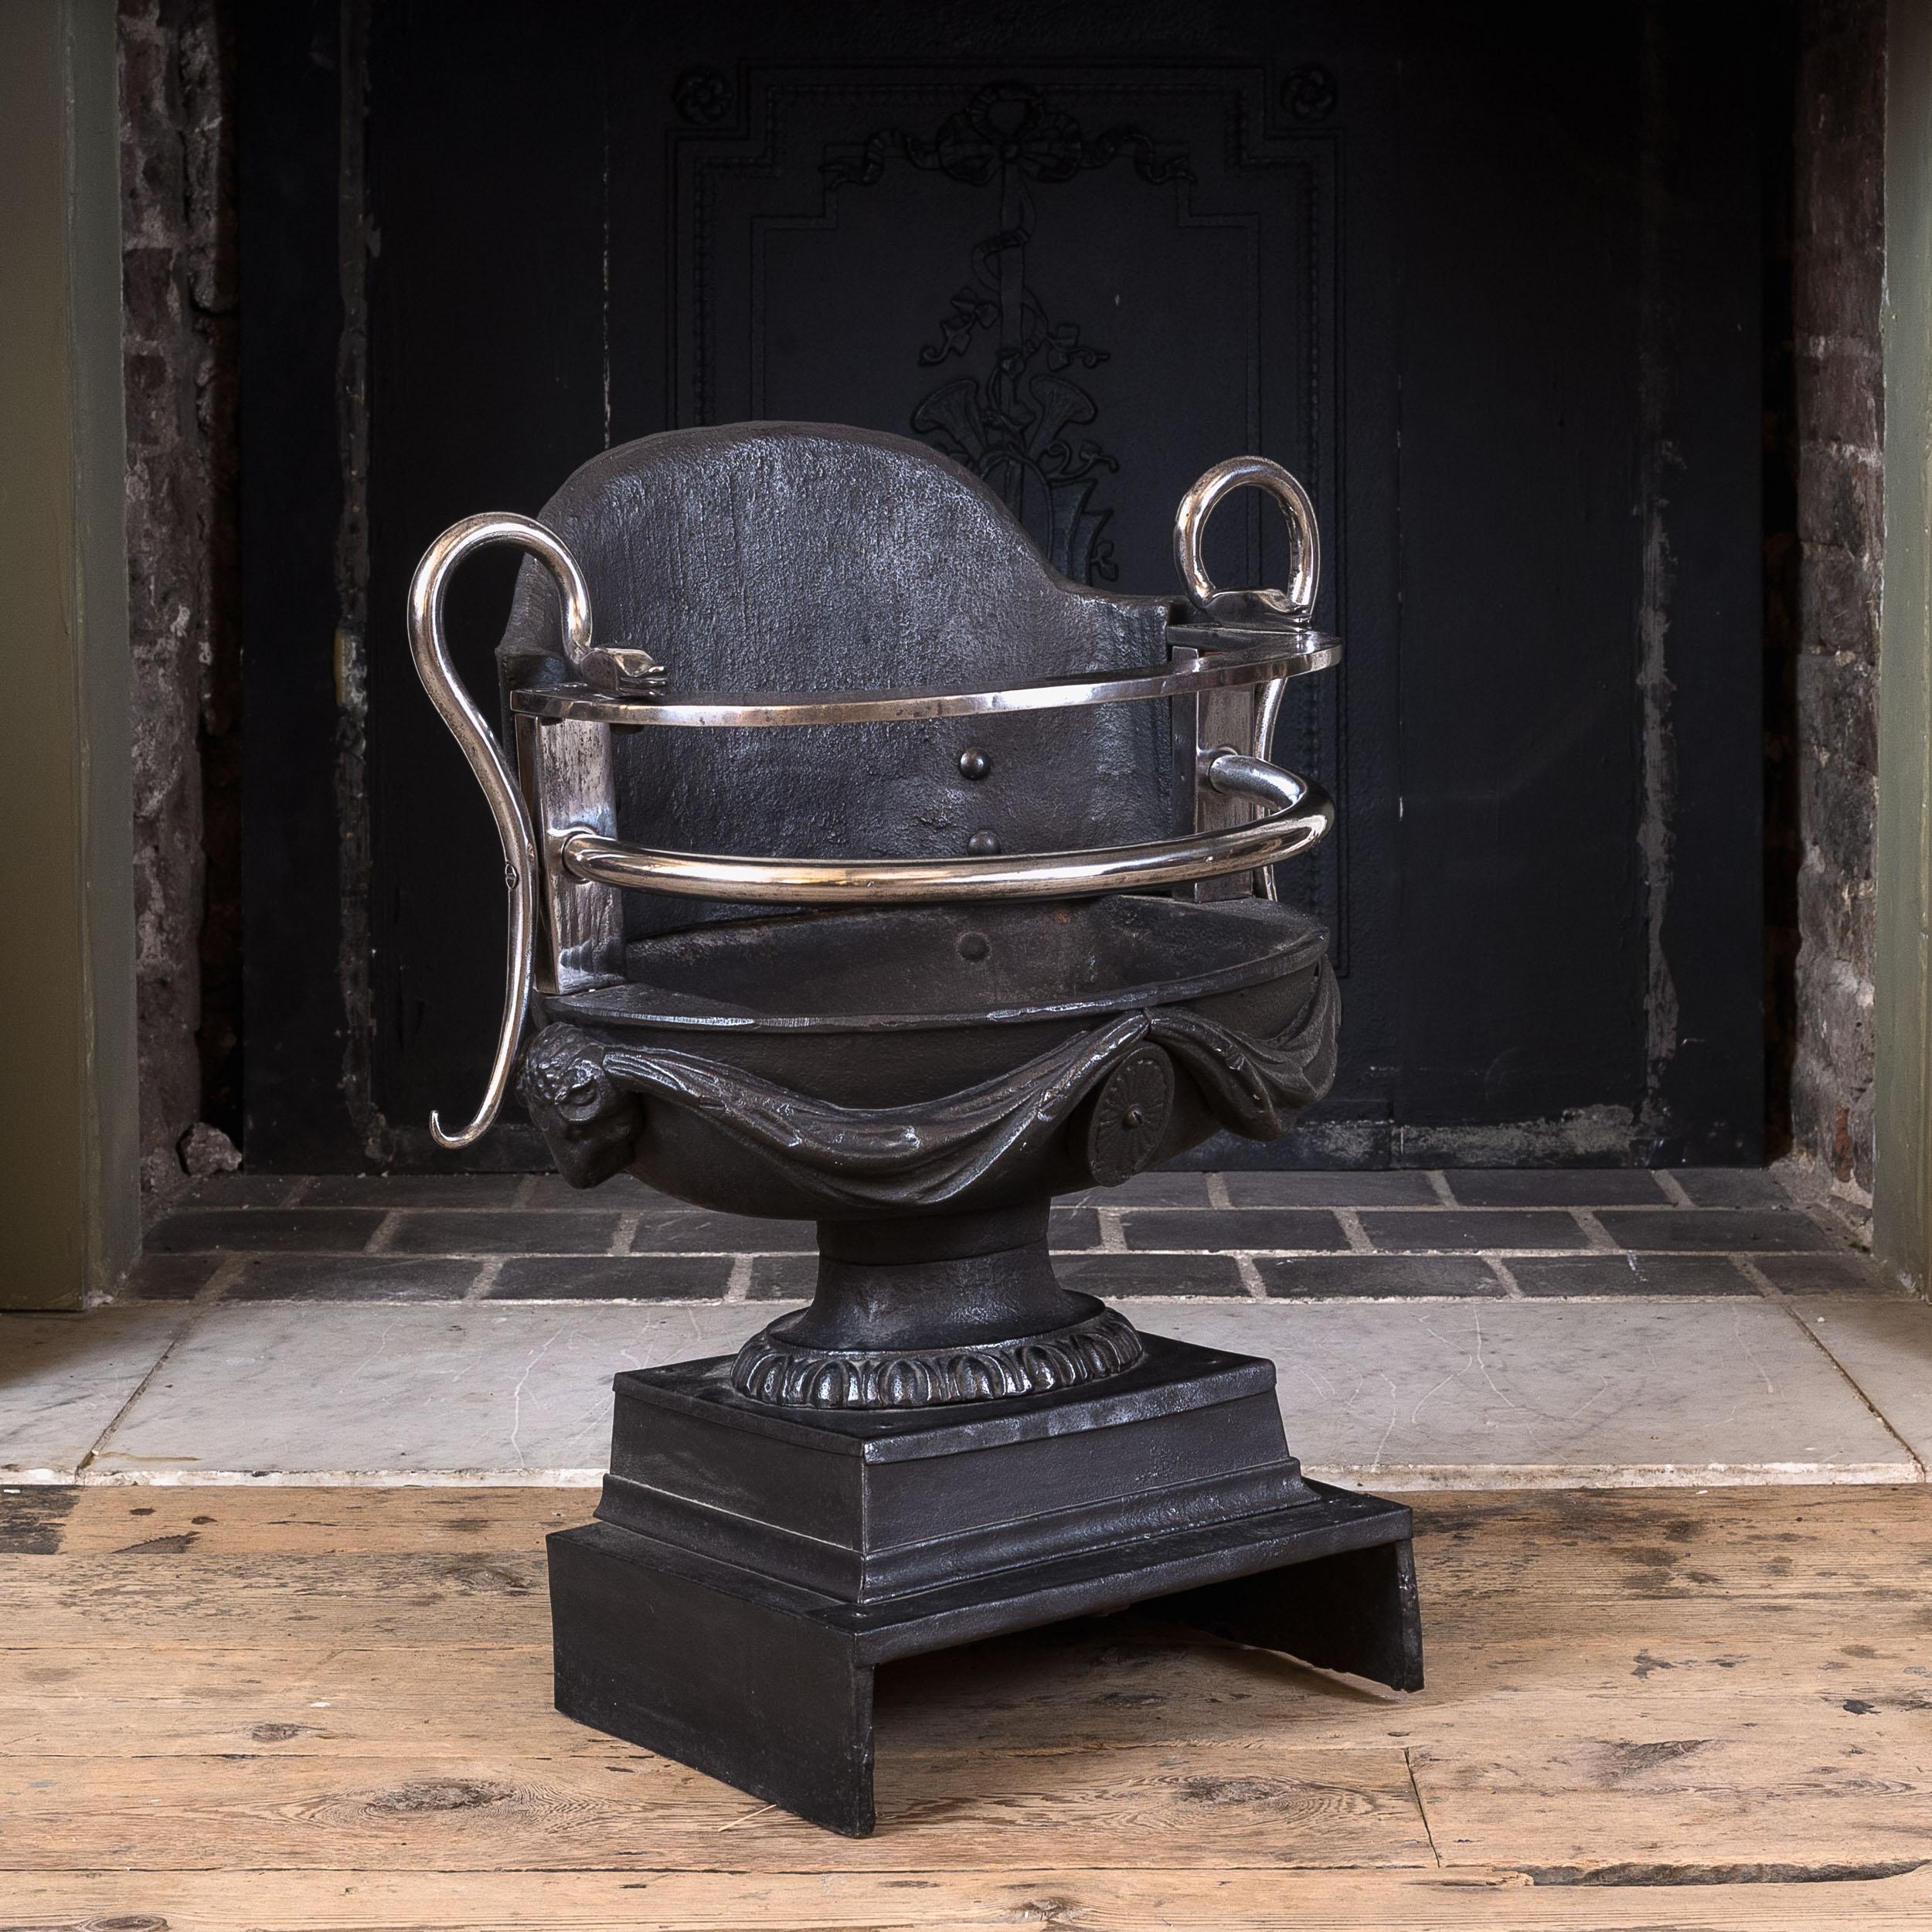 Nineteenth century cast iron coal grate, the handles formed as scrolled serpents, the urn grate with swagged pelmets flanking oval paterae, on plinth base.

Base is 25 cm x 32 cm.
